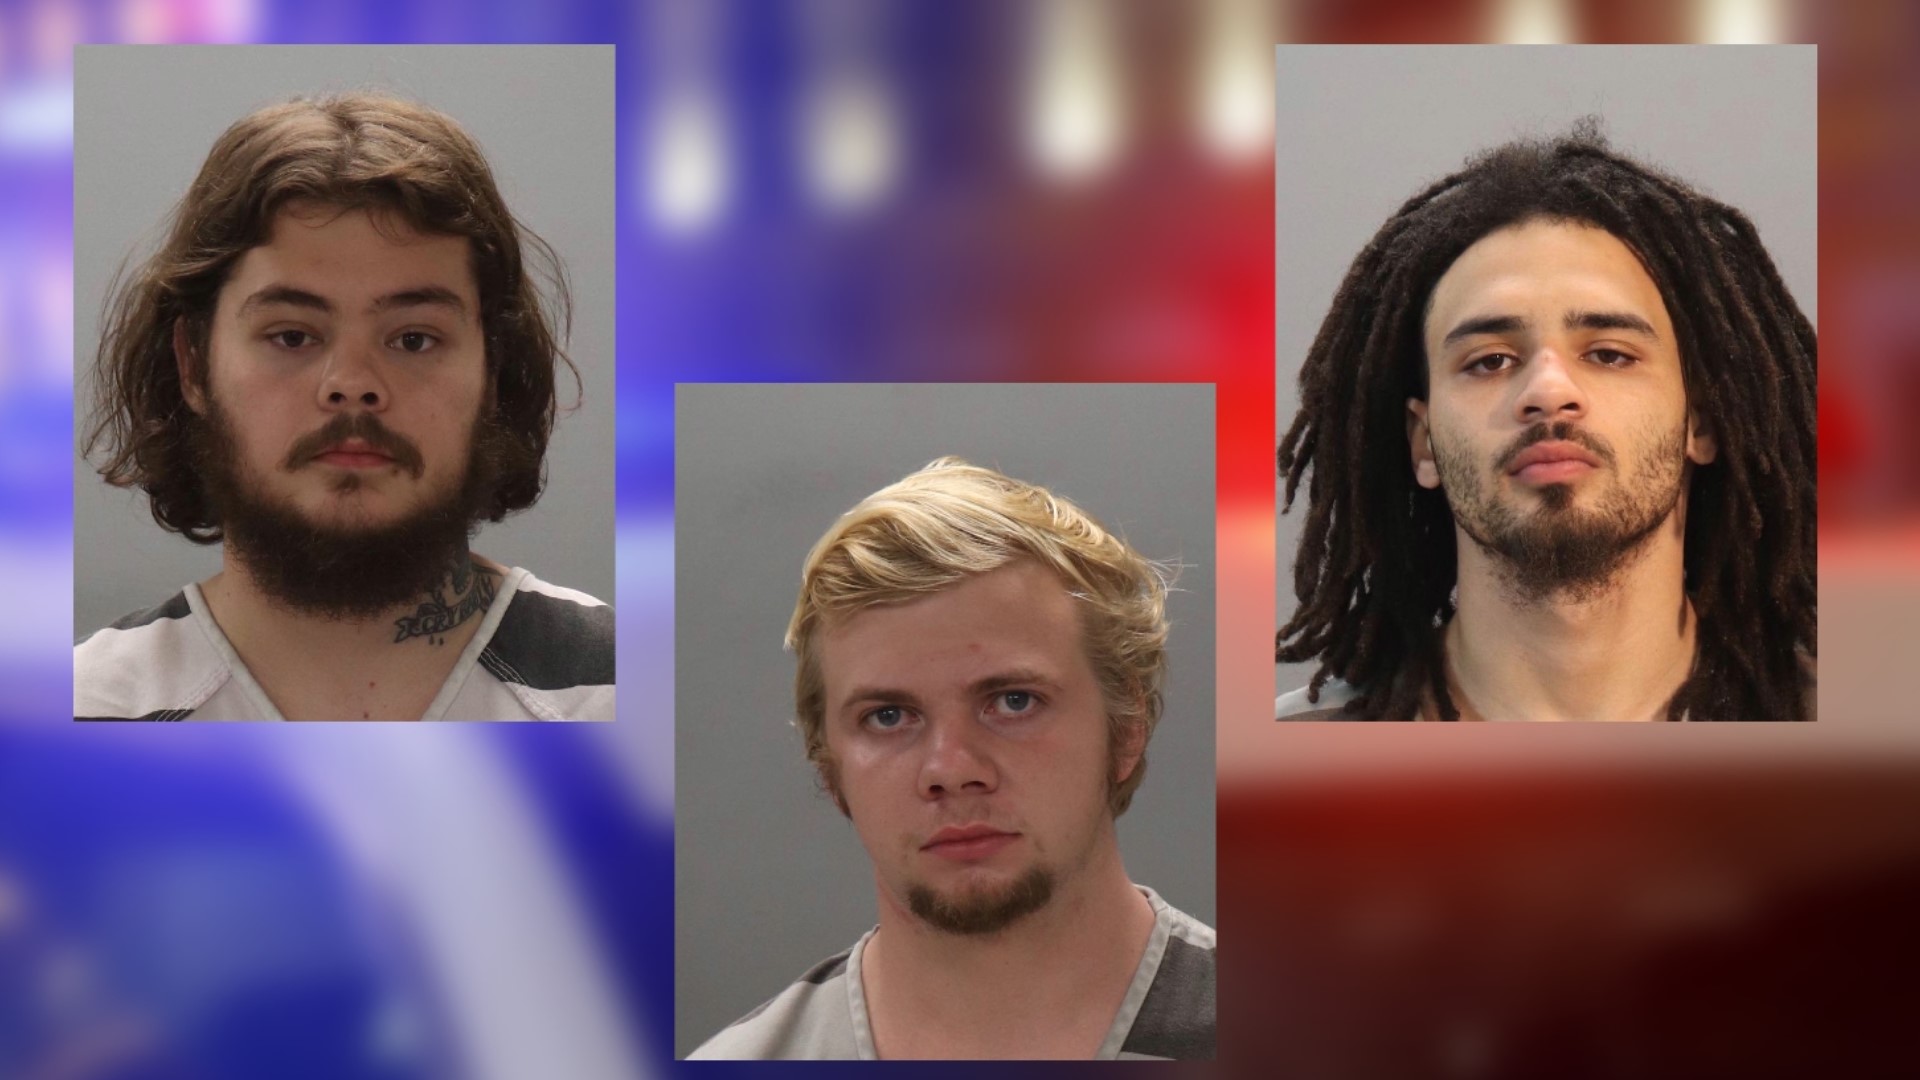 Zachary Trey Jordan, 23, William Gage Brewster, 22 and Dalton Kevin Davis, 22, were all arrested and were in custody as of Tuesday.